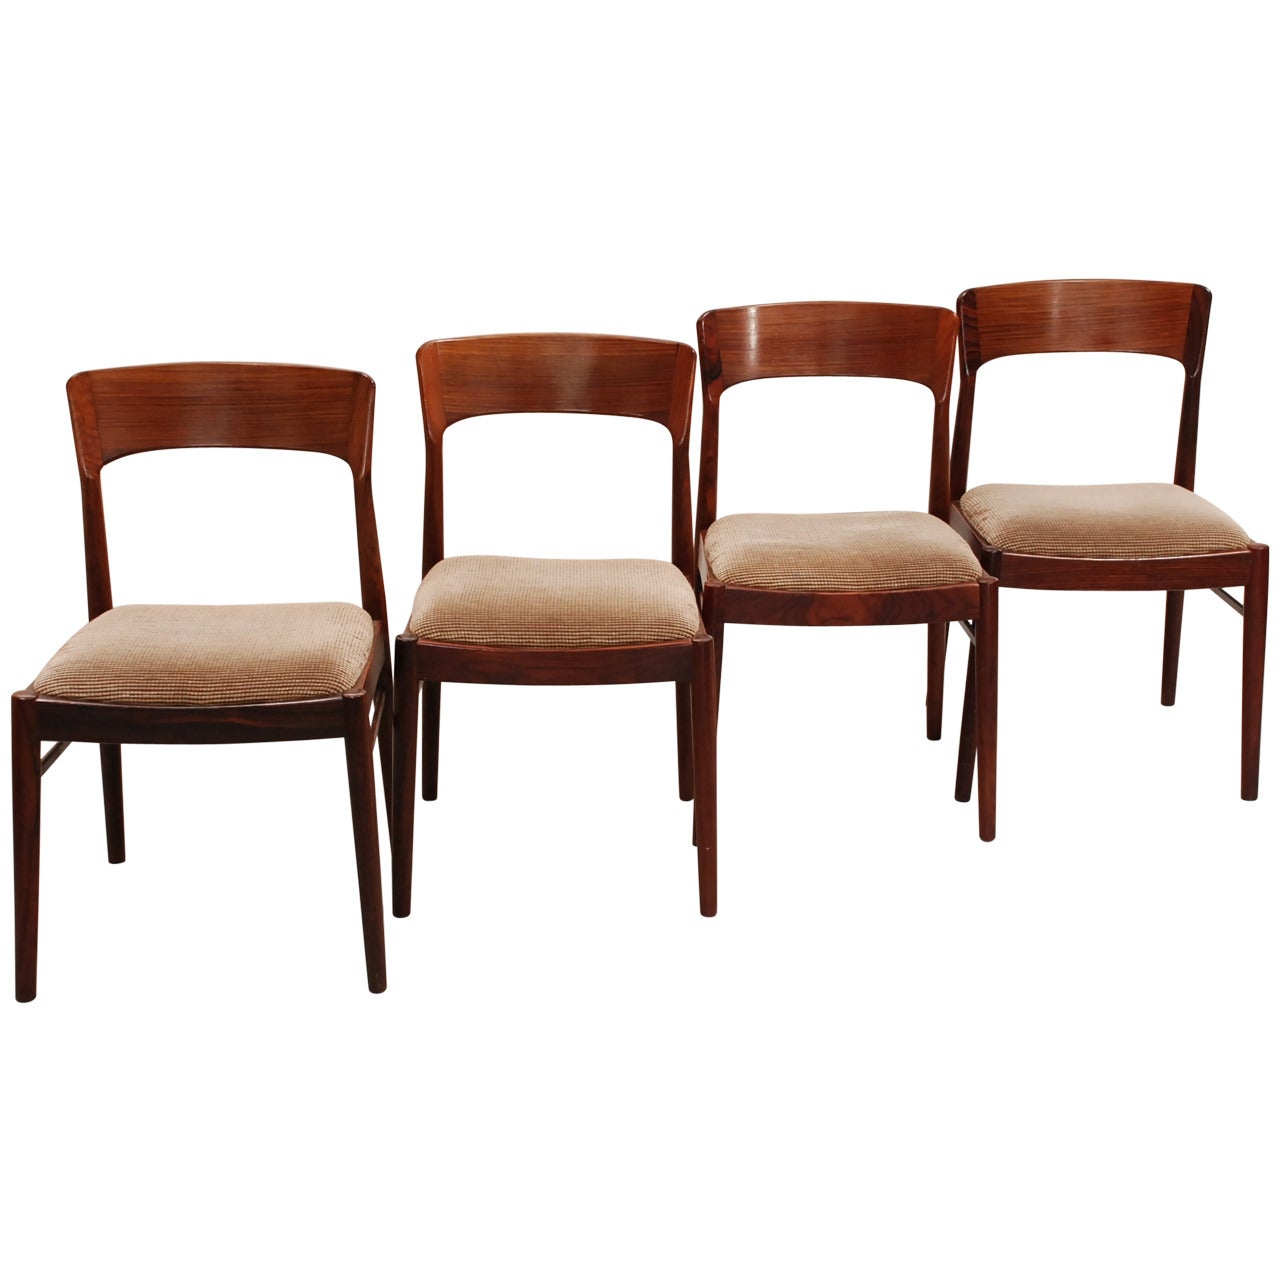 Four Kai Kristiansen Chairs in Palisander For Sale